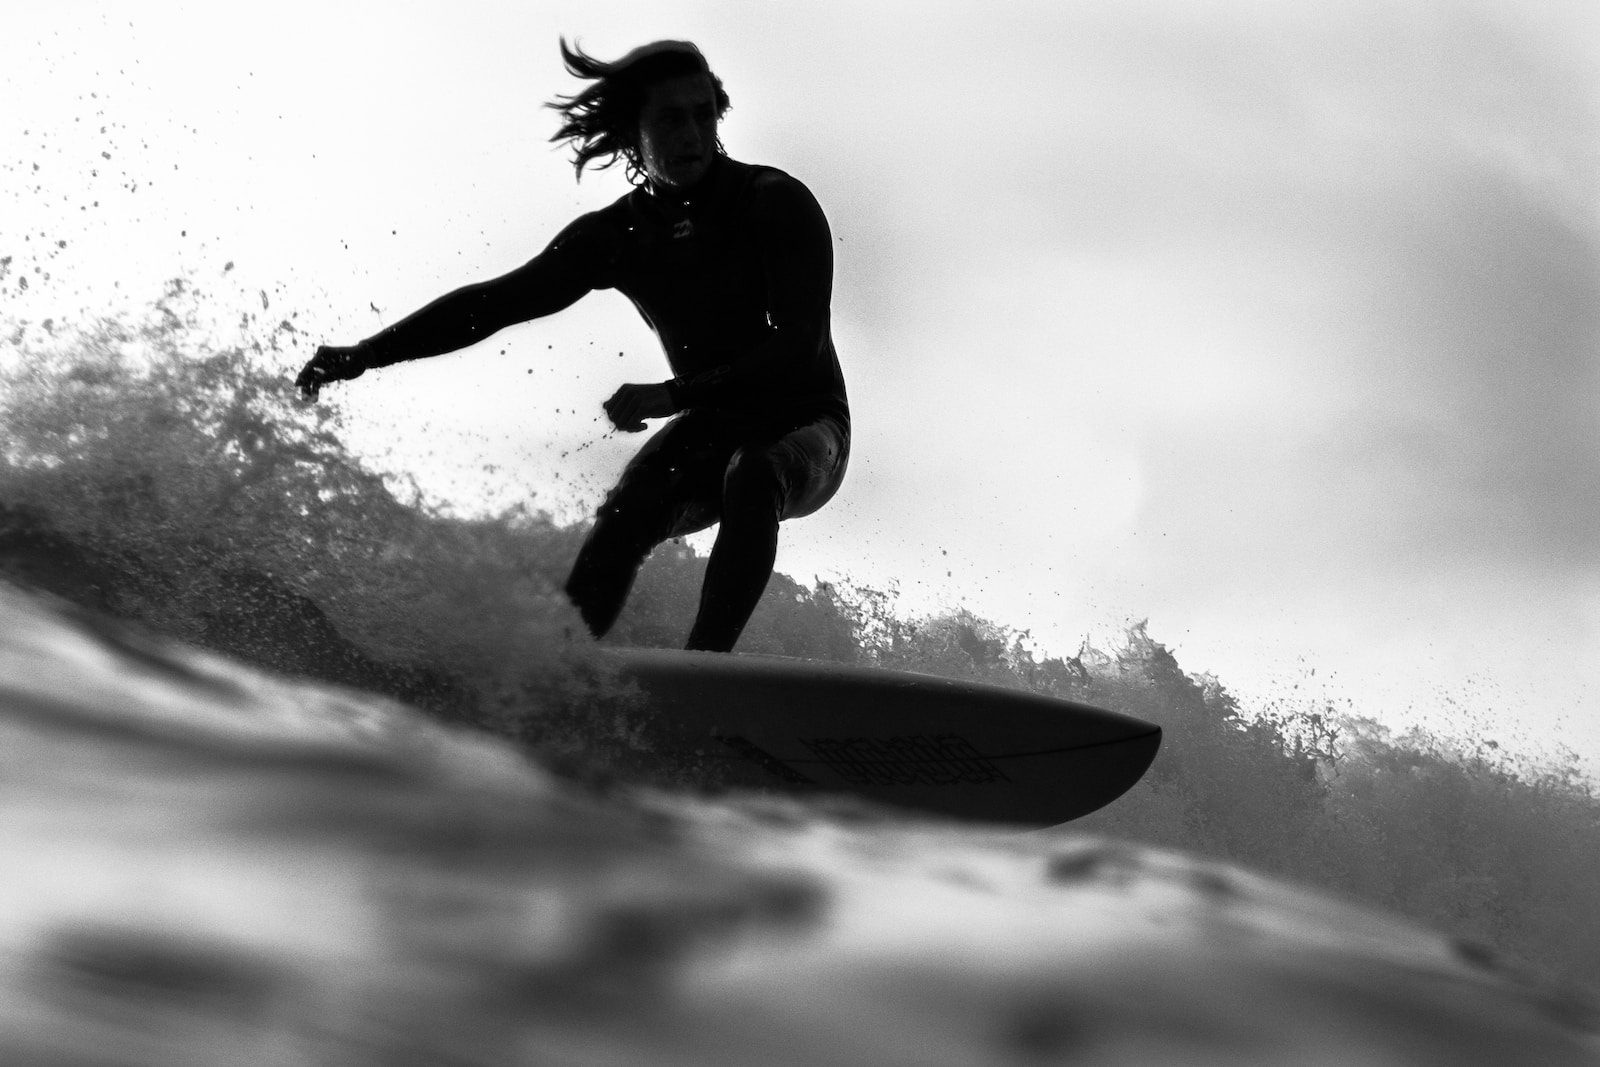 It’s never too late to learn how to surf